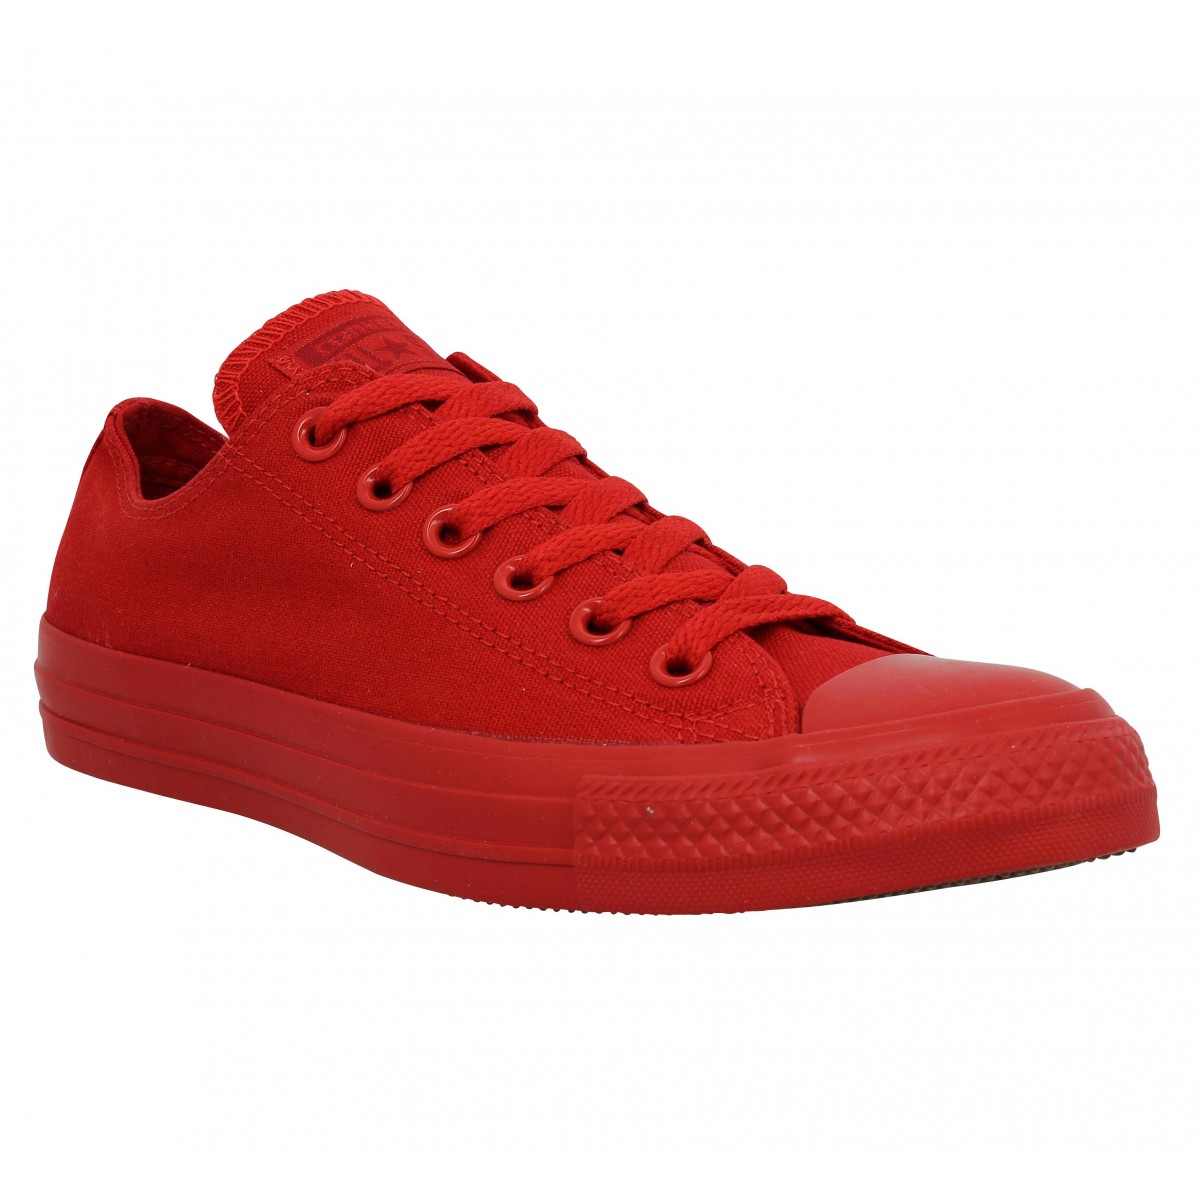 CONVERSE Chuck Taylor All Star toile Femme Mono Rouge